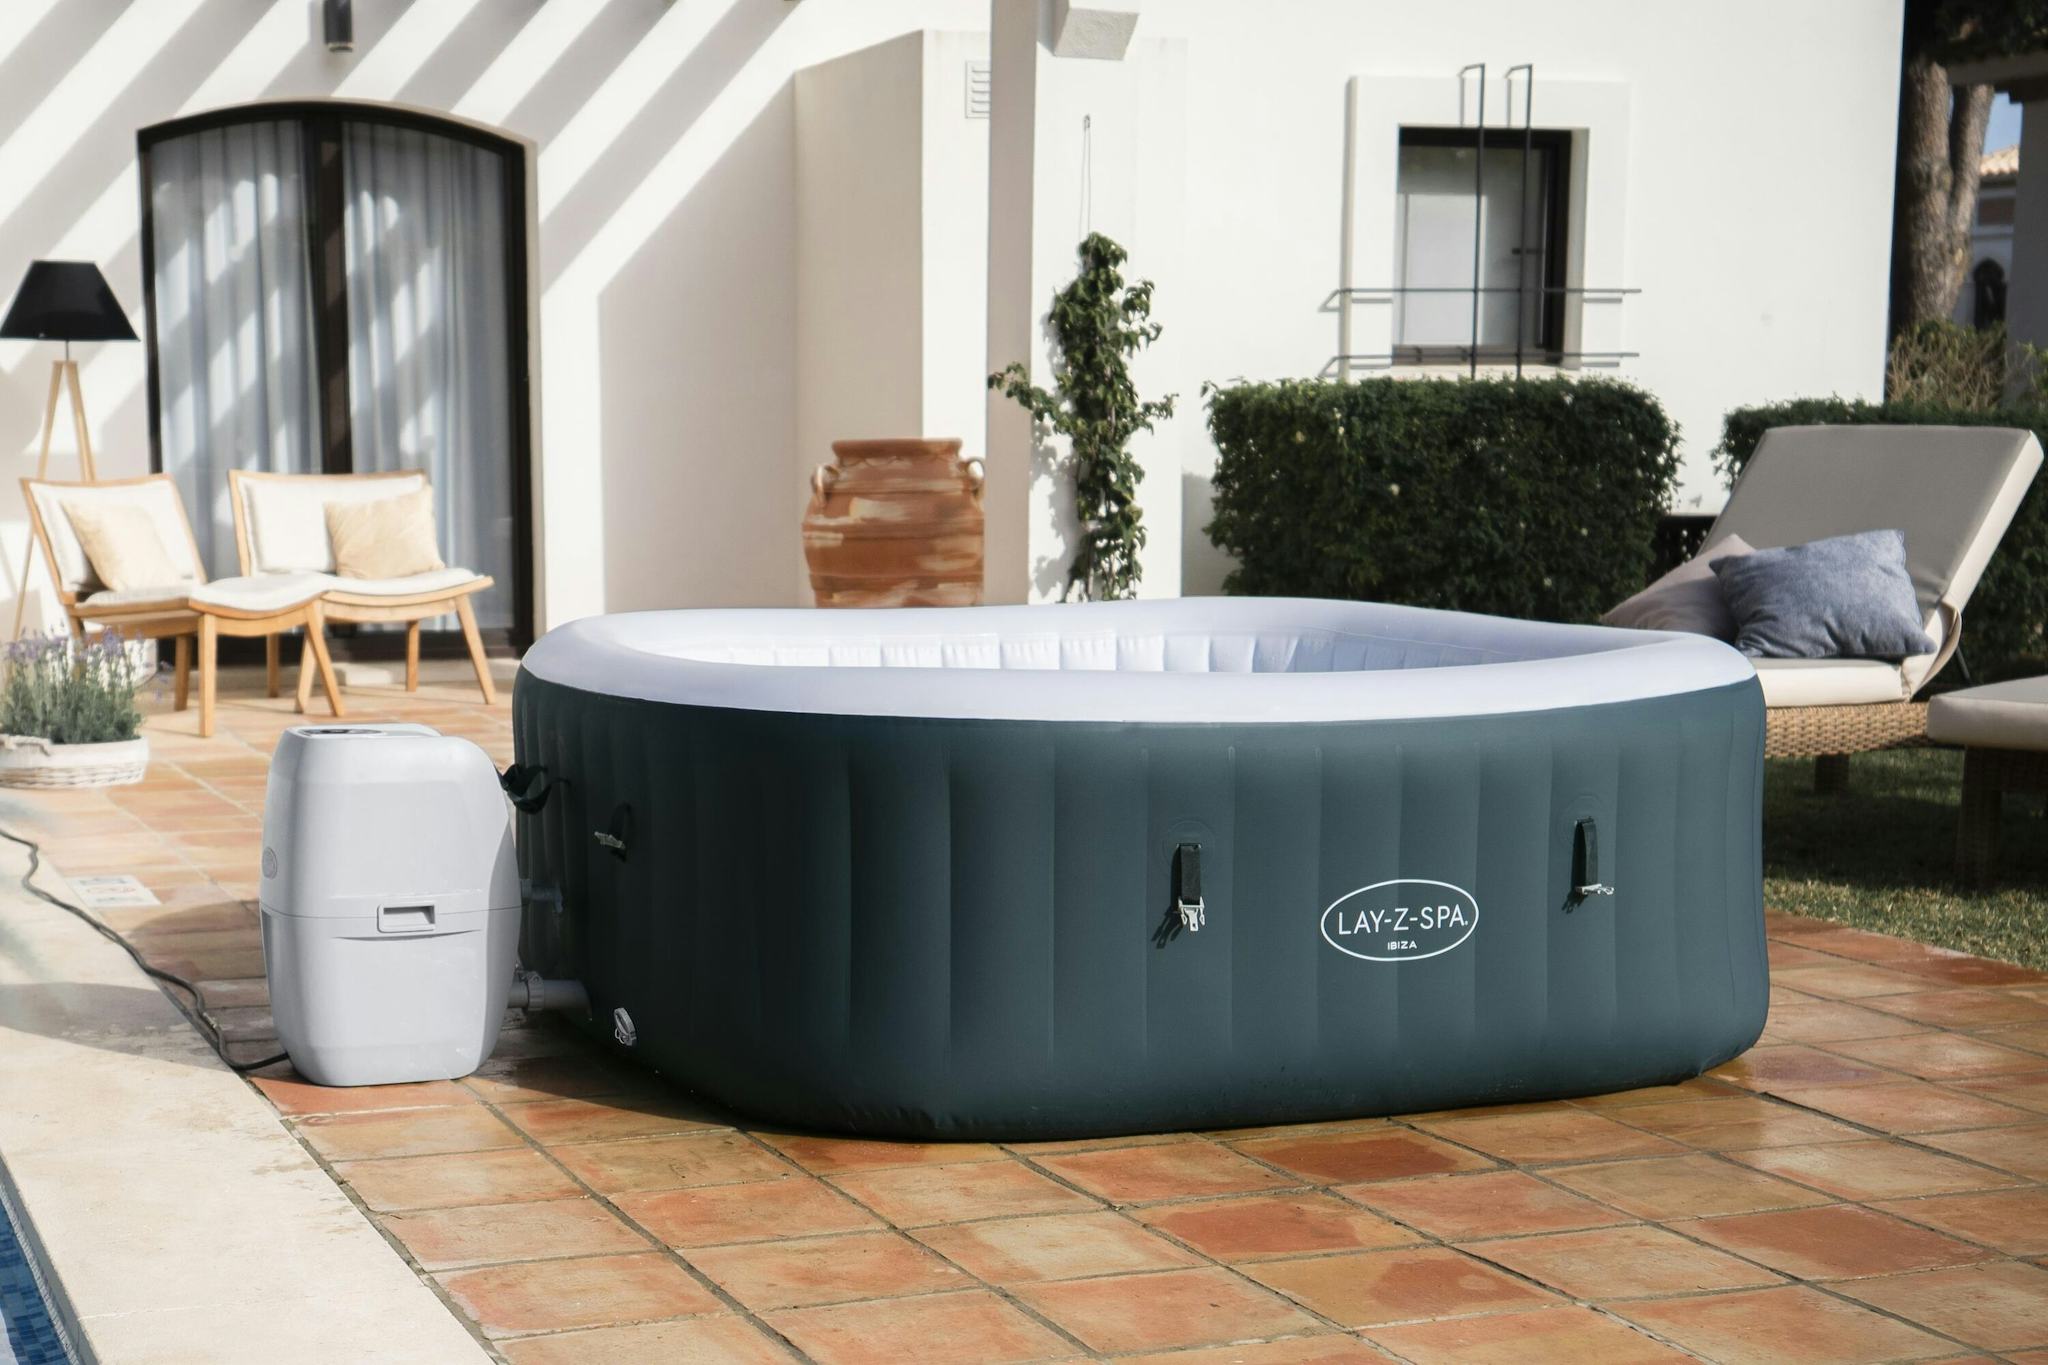 Spas Gonflables Spa gonflable carré Lay-Z-Spa Ibiza Airjet™ 4 - 6 personnes Bestway 5